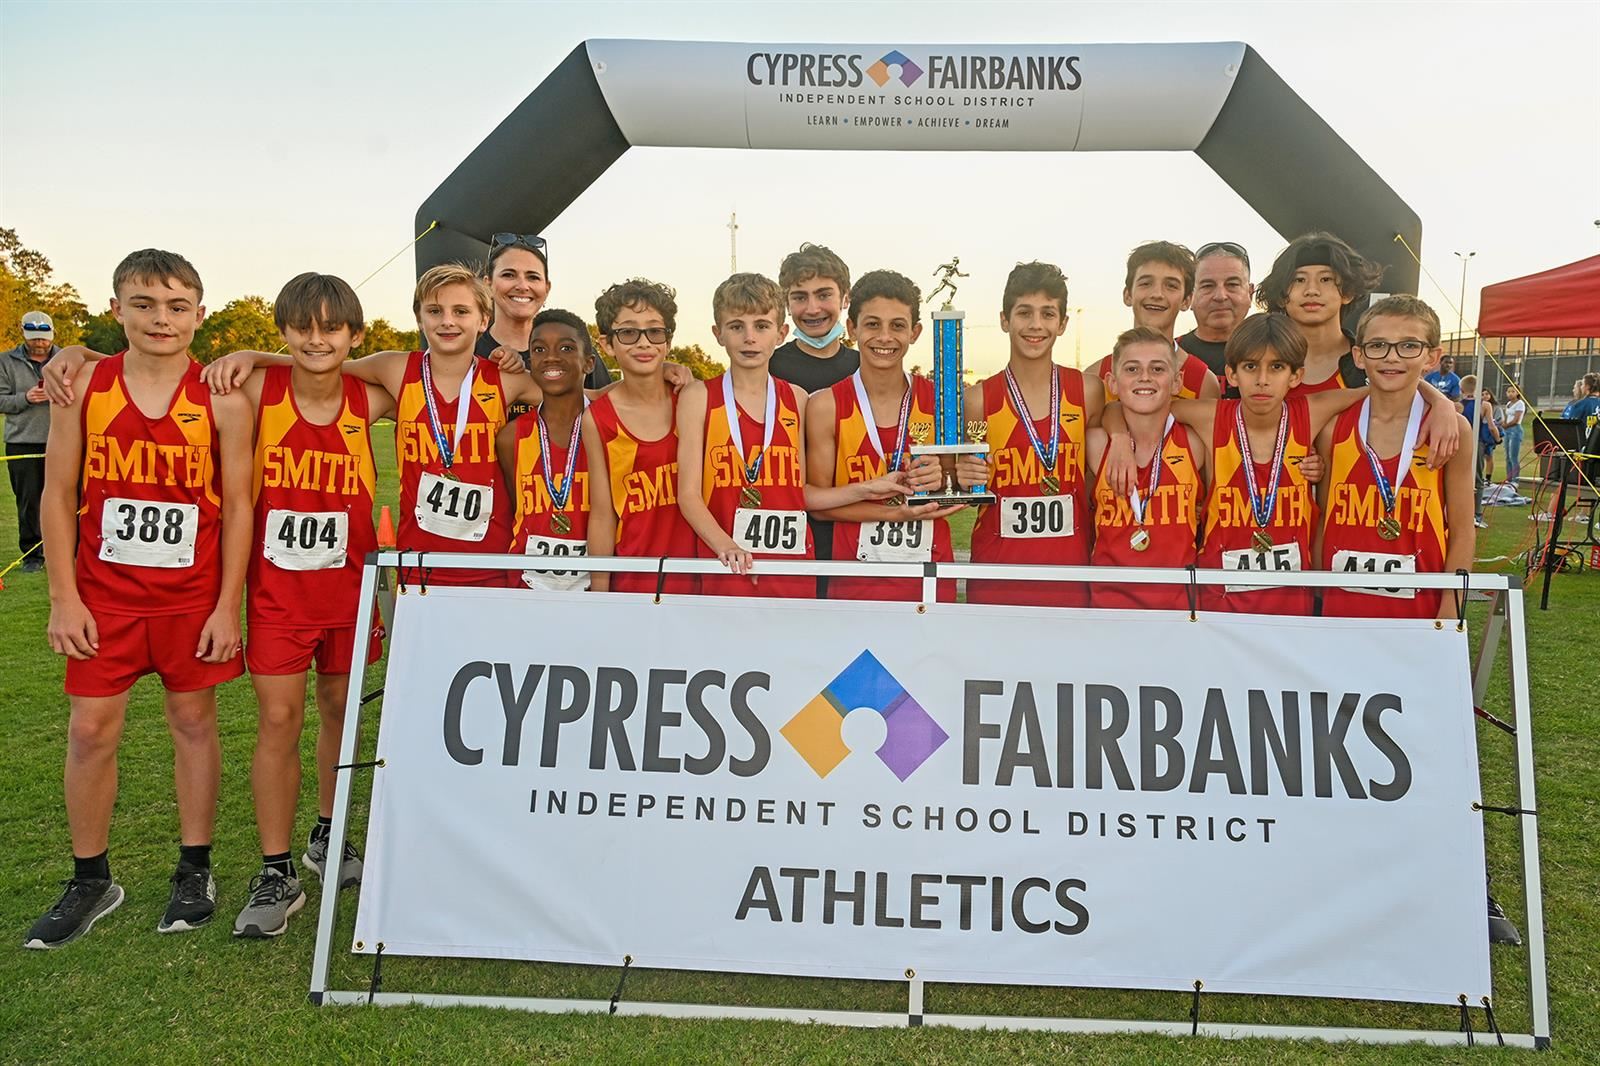 Smith Middle School won the seventh grade boys’ cross country team title with 34 points on Oct. 19 at Cypress Woods.